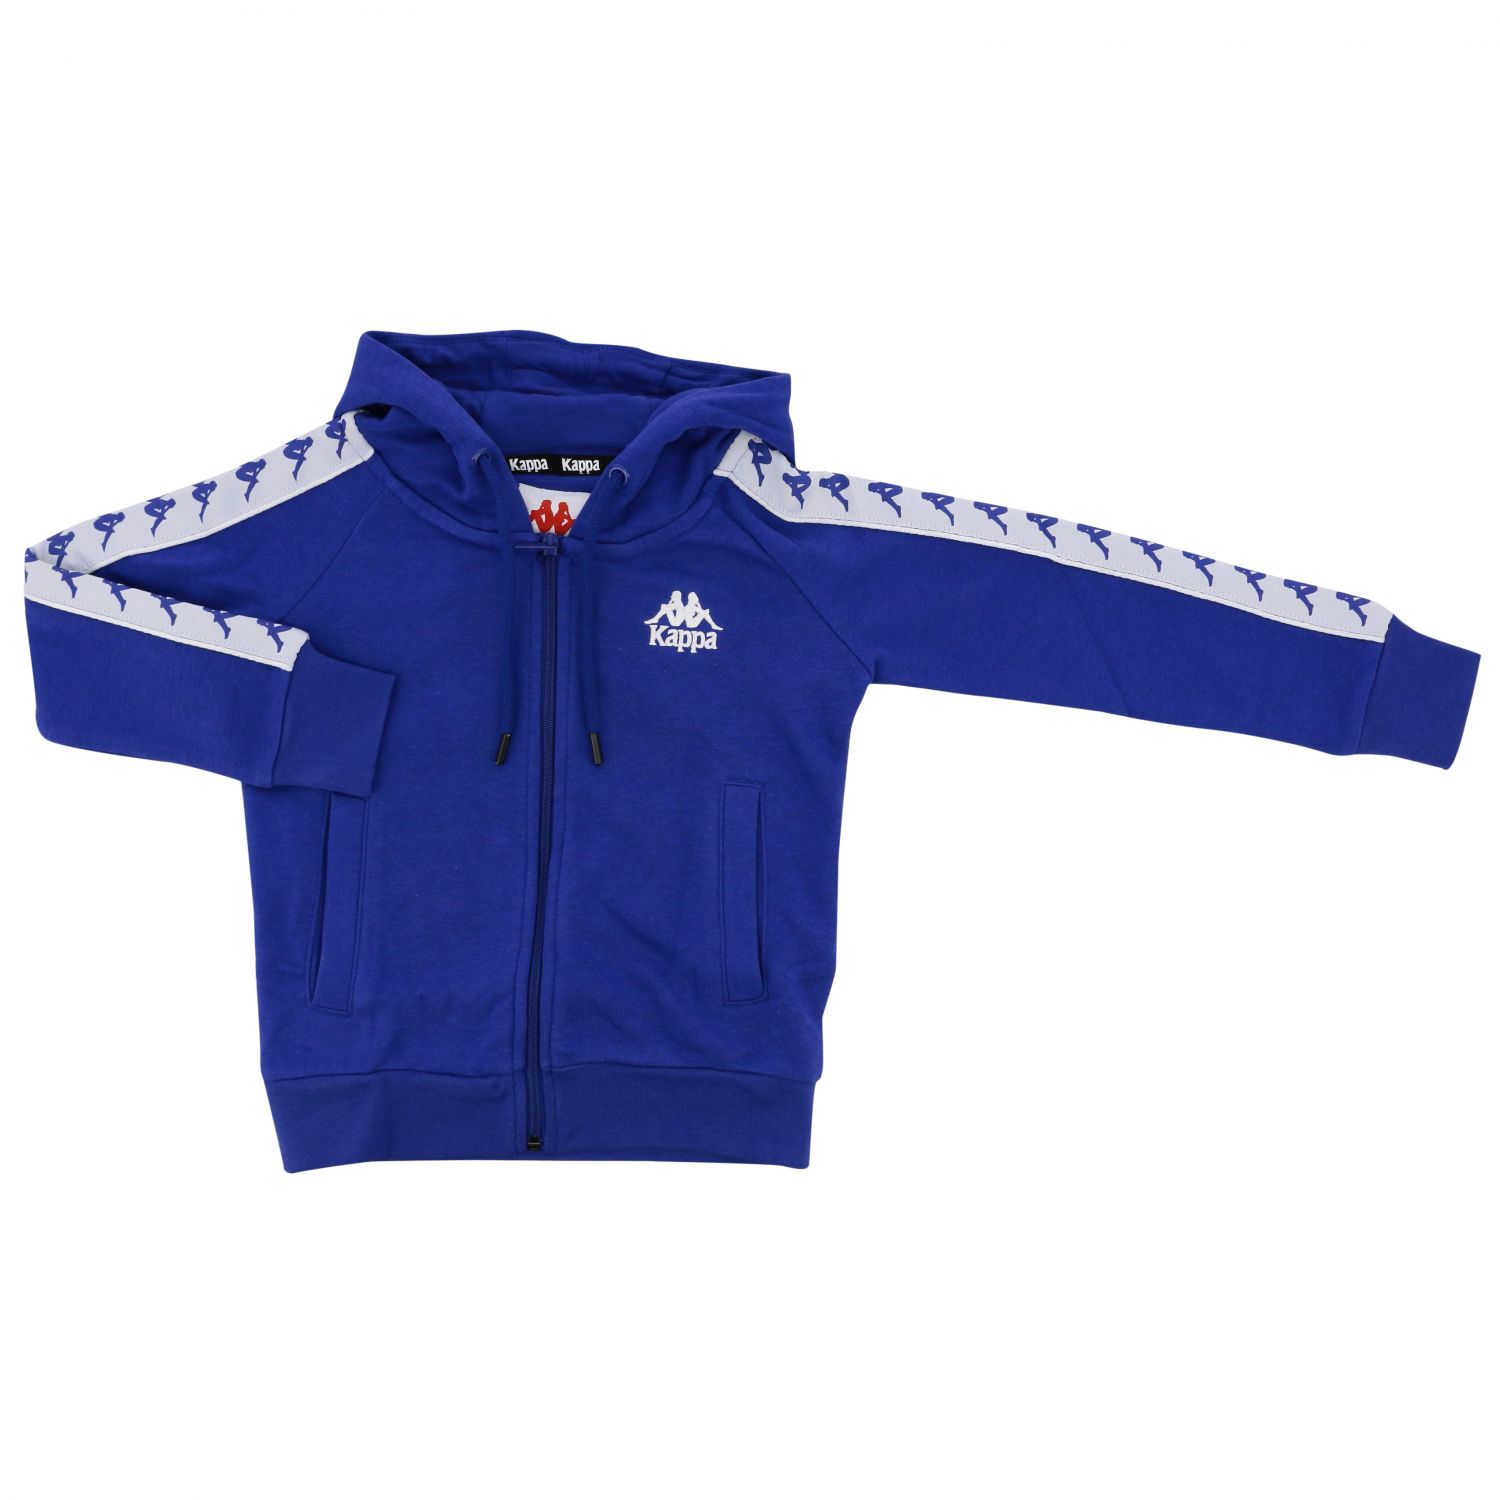 Kappa Outlet: sweater for boys - Royal Blue | Kappa sweater 3031110 ...